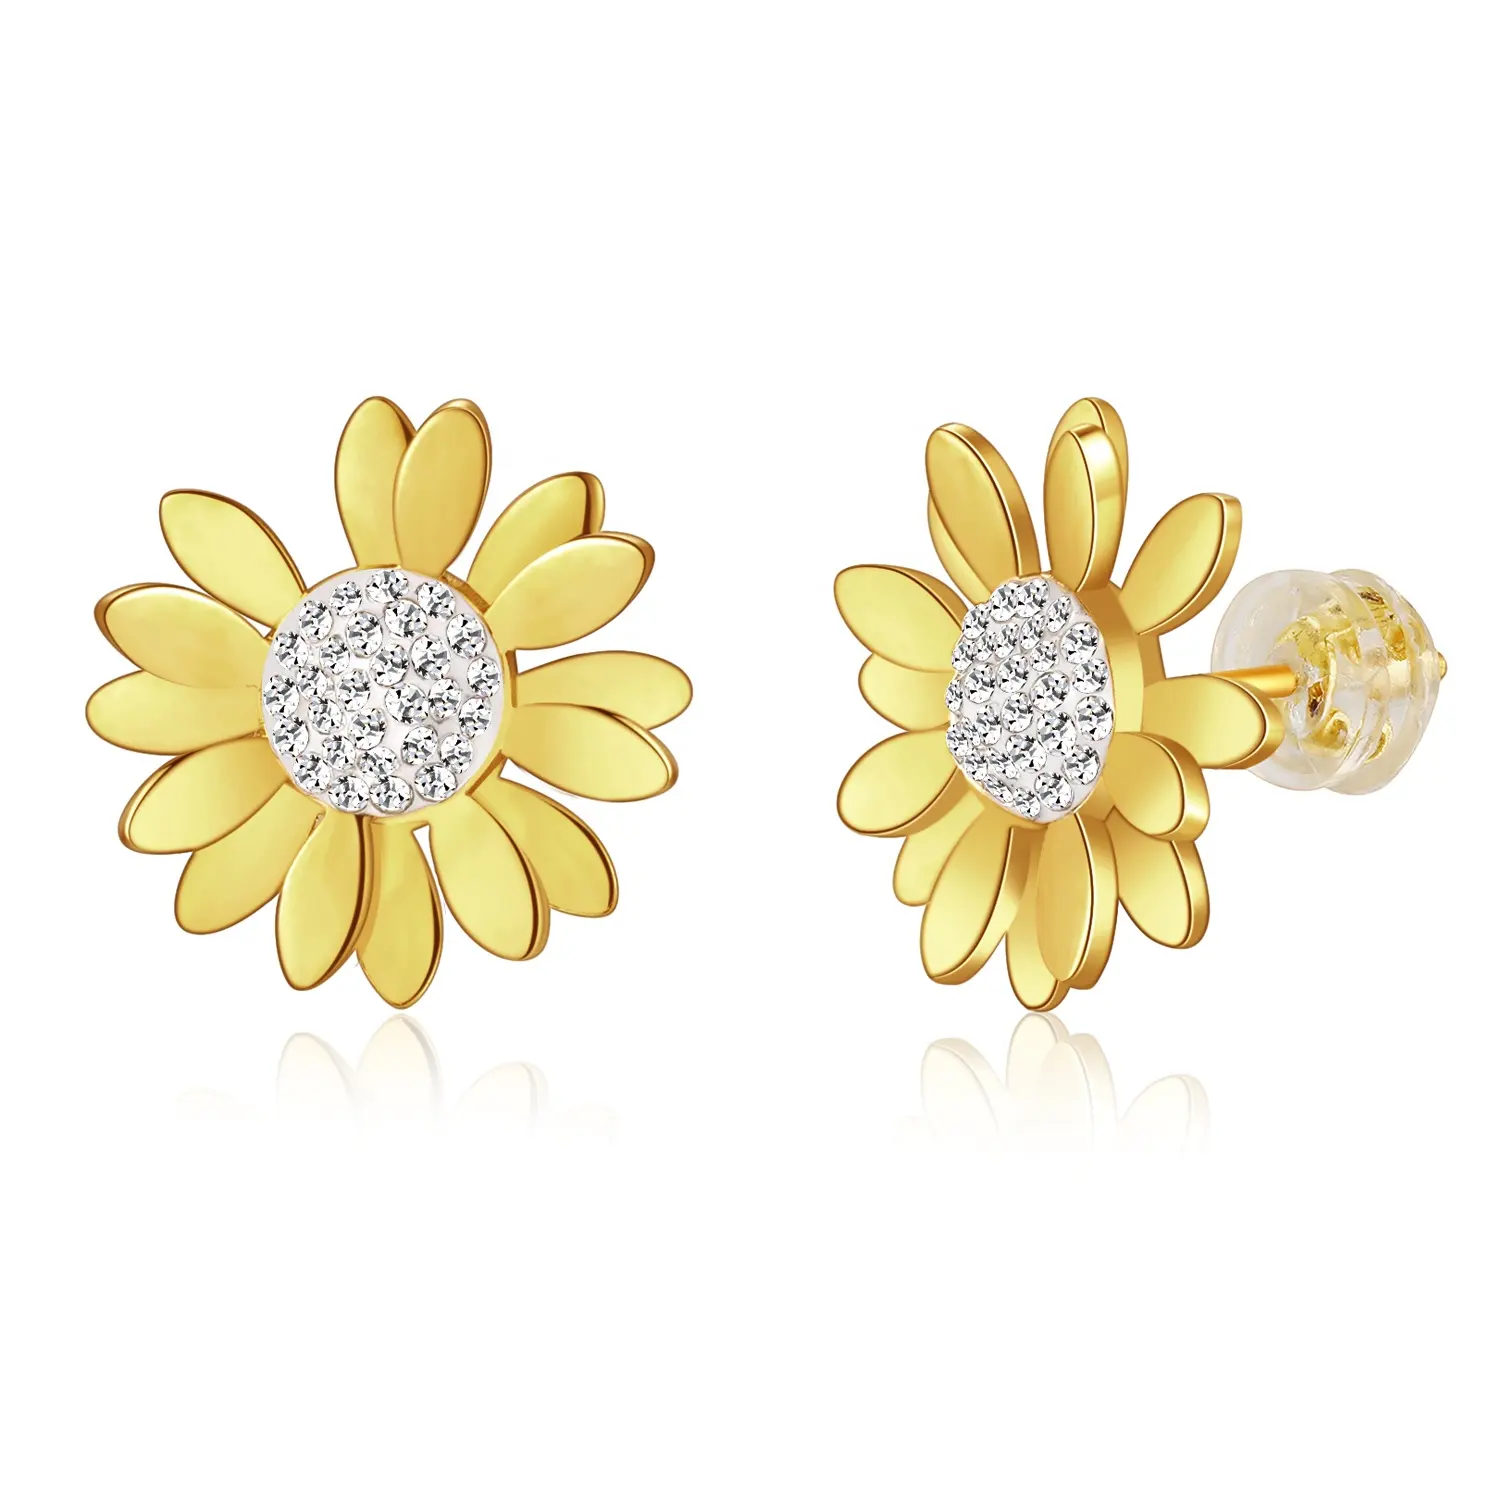 RFJEWEL Etsy Hot 2022 High Quality 24K Gold Plated 316L stainless steel Daisy stud earrings with Crystals for Women